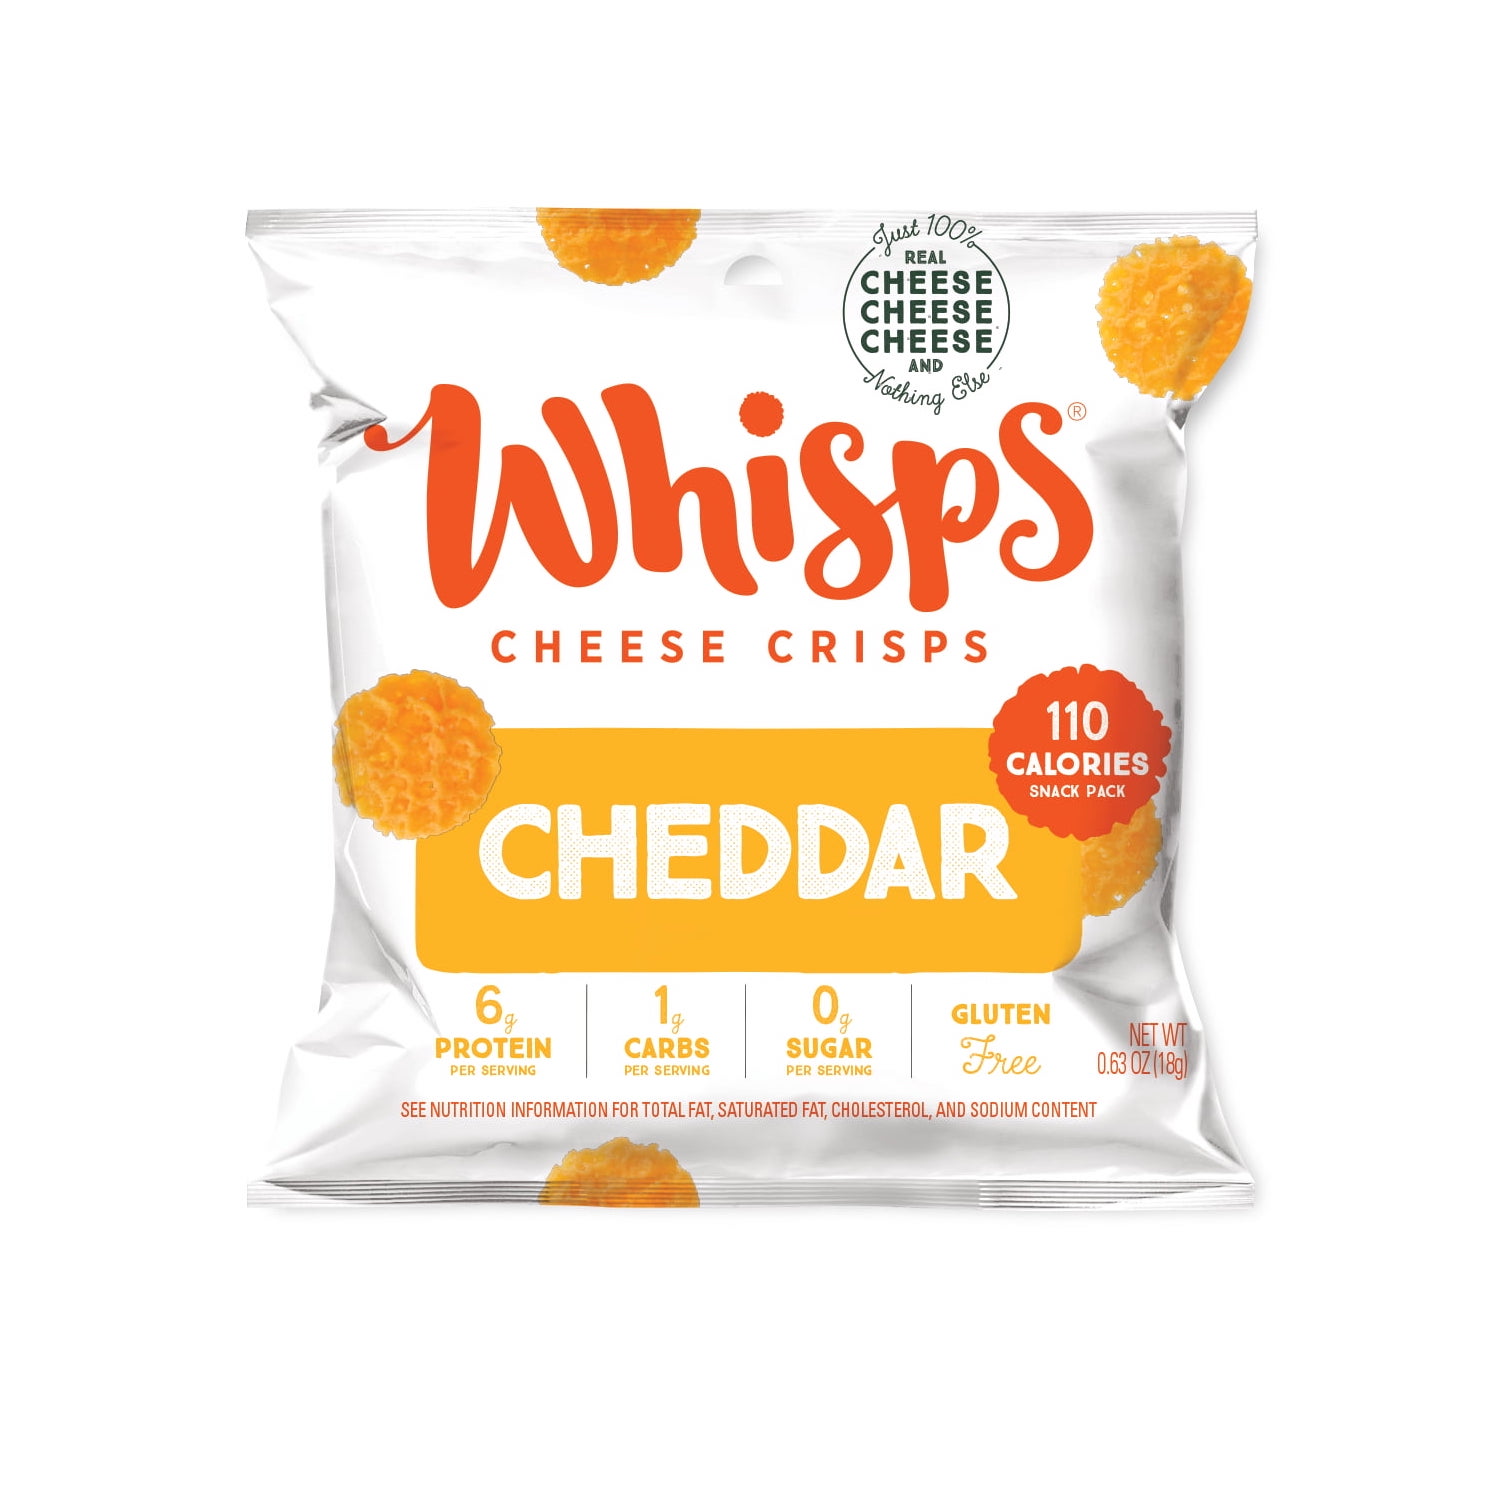 Whisps Cheddar Cheese Crisps, 0.63 oz, Keto Friendly Snacks, 6 Count - image 4 of 7